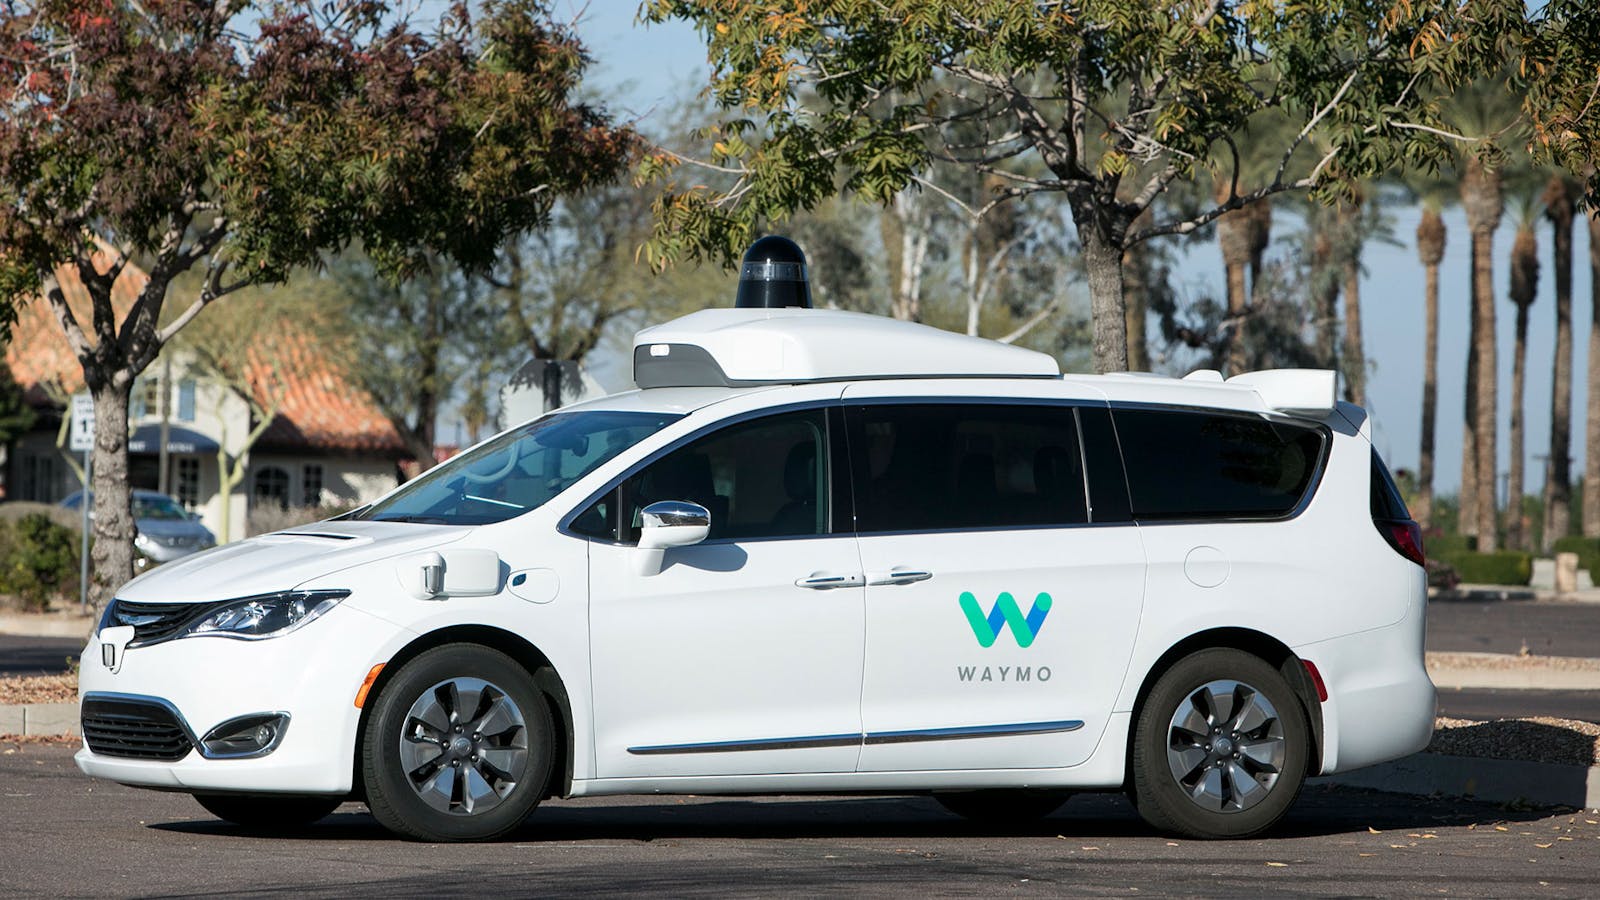 A Chrysler Pacifica hybrid outfitted with Waymo's self-driving technology, in Tempe, Arizona. Photo by AP